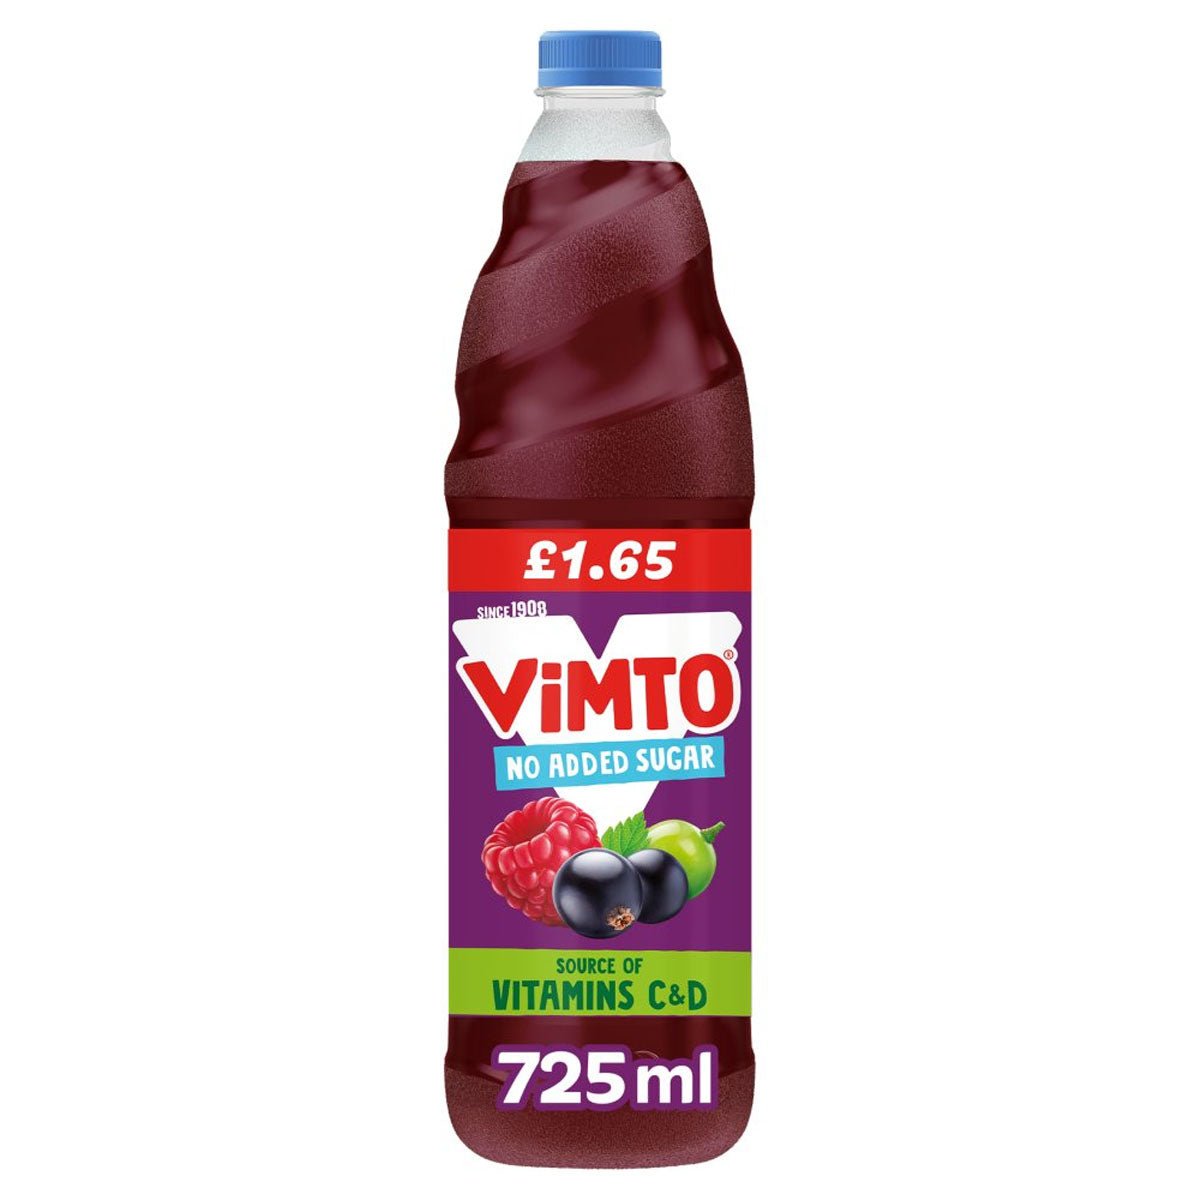 A bottle of Vimto - Real Fruit Squash No Added Sugar - 725ml with berries on it.